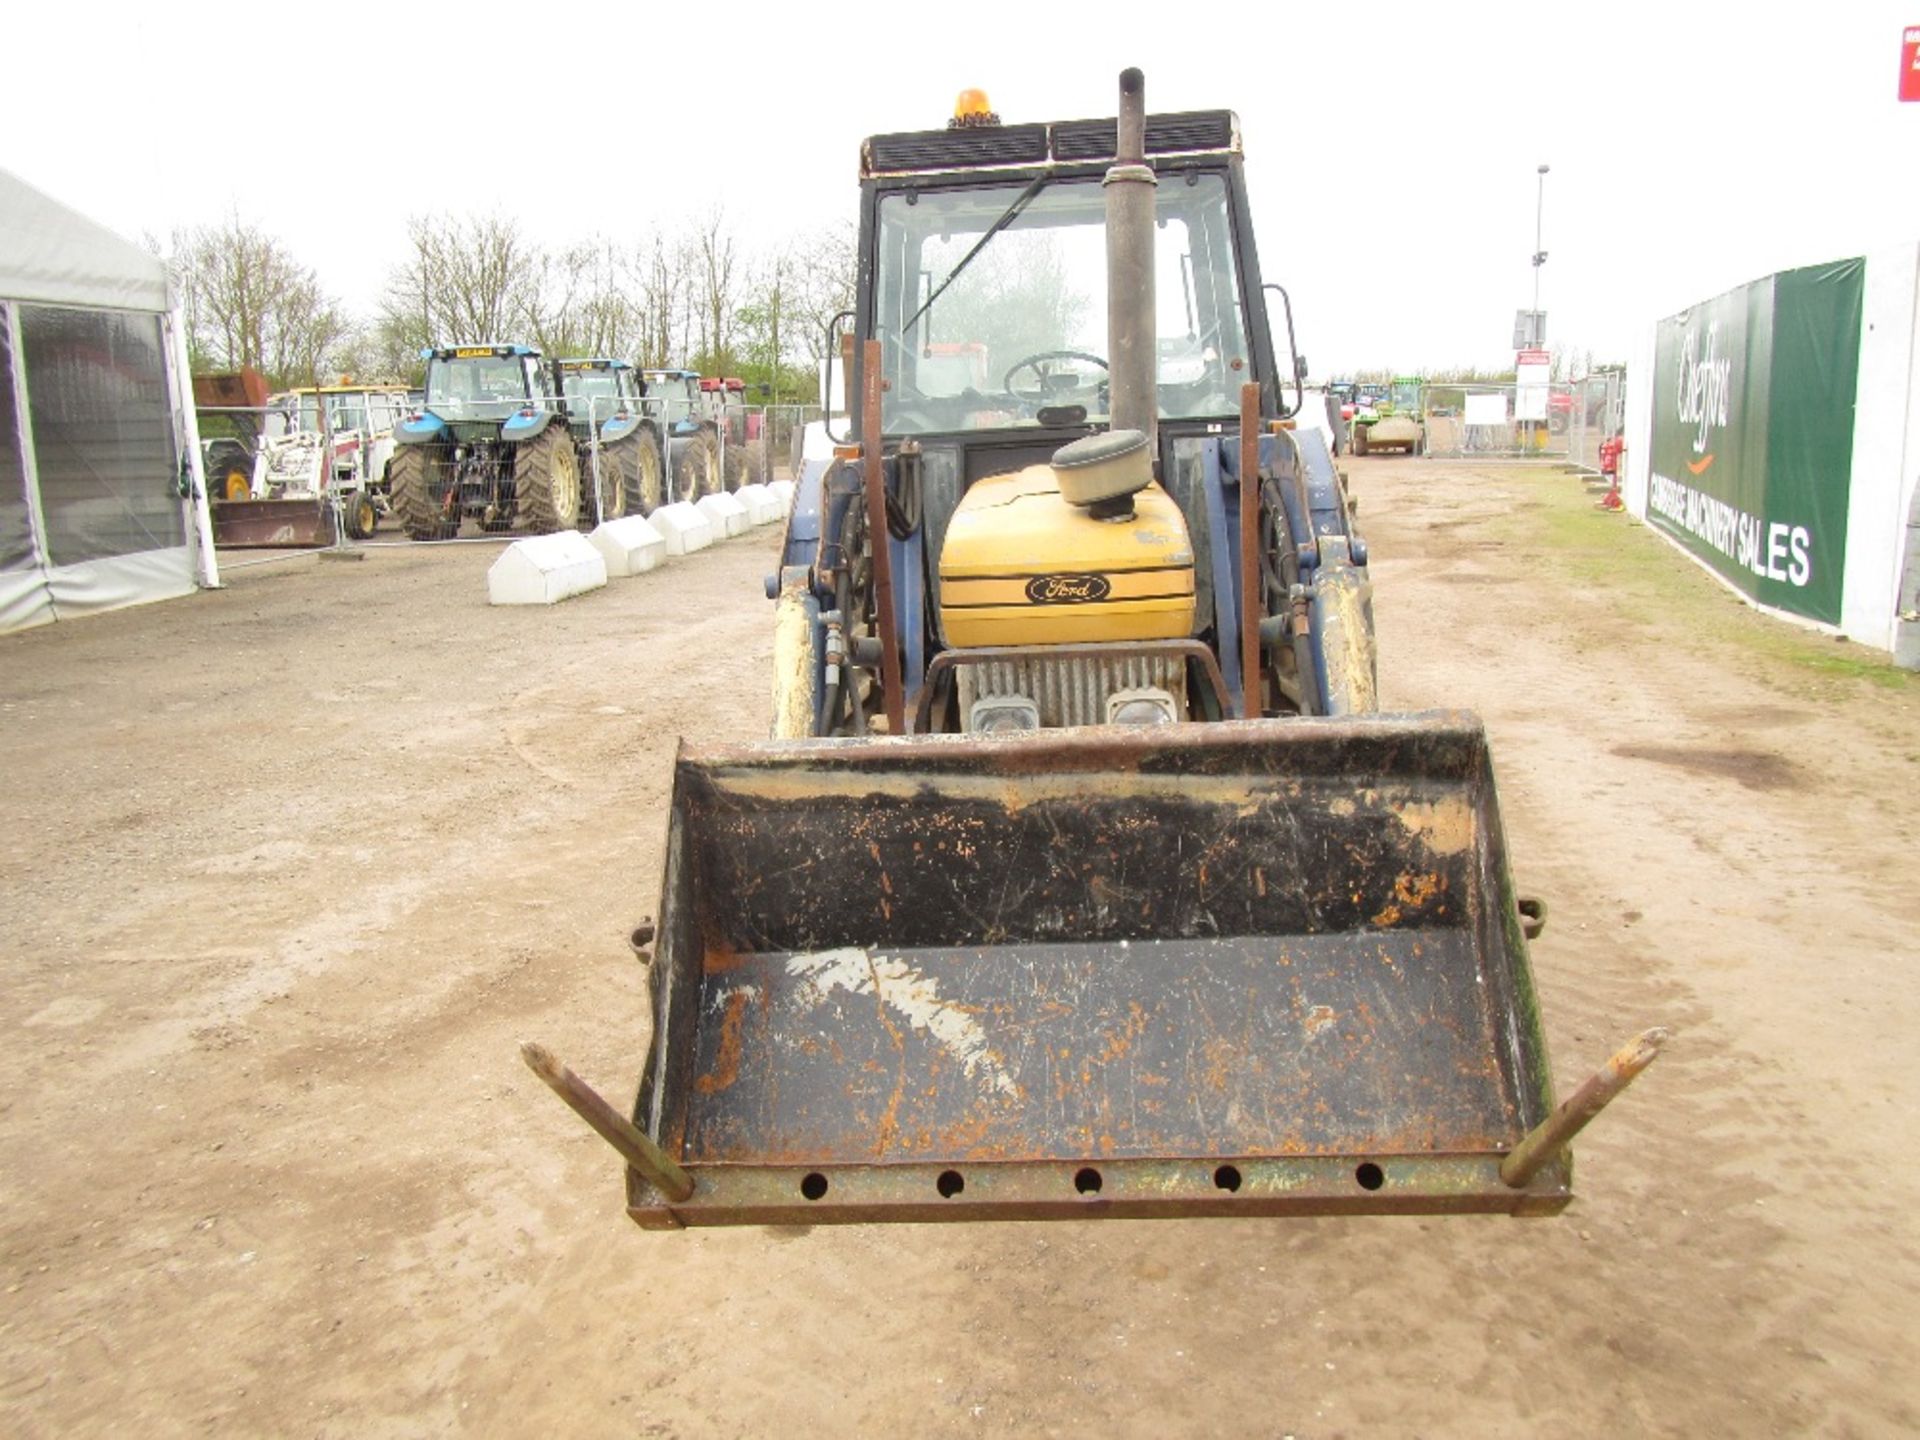 Ford 5610H 2wd Tractor c/w Bomford 3517 Power Loader. 2 Owners from new, Ex Council Reg. No. C429 - Image 2 of 16